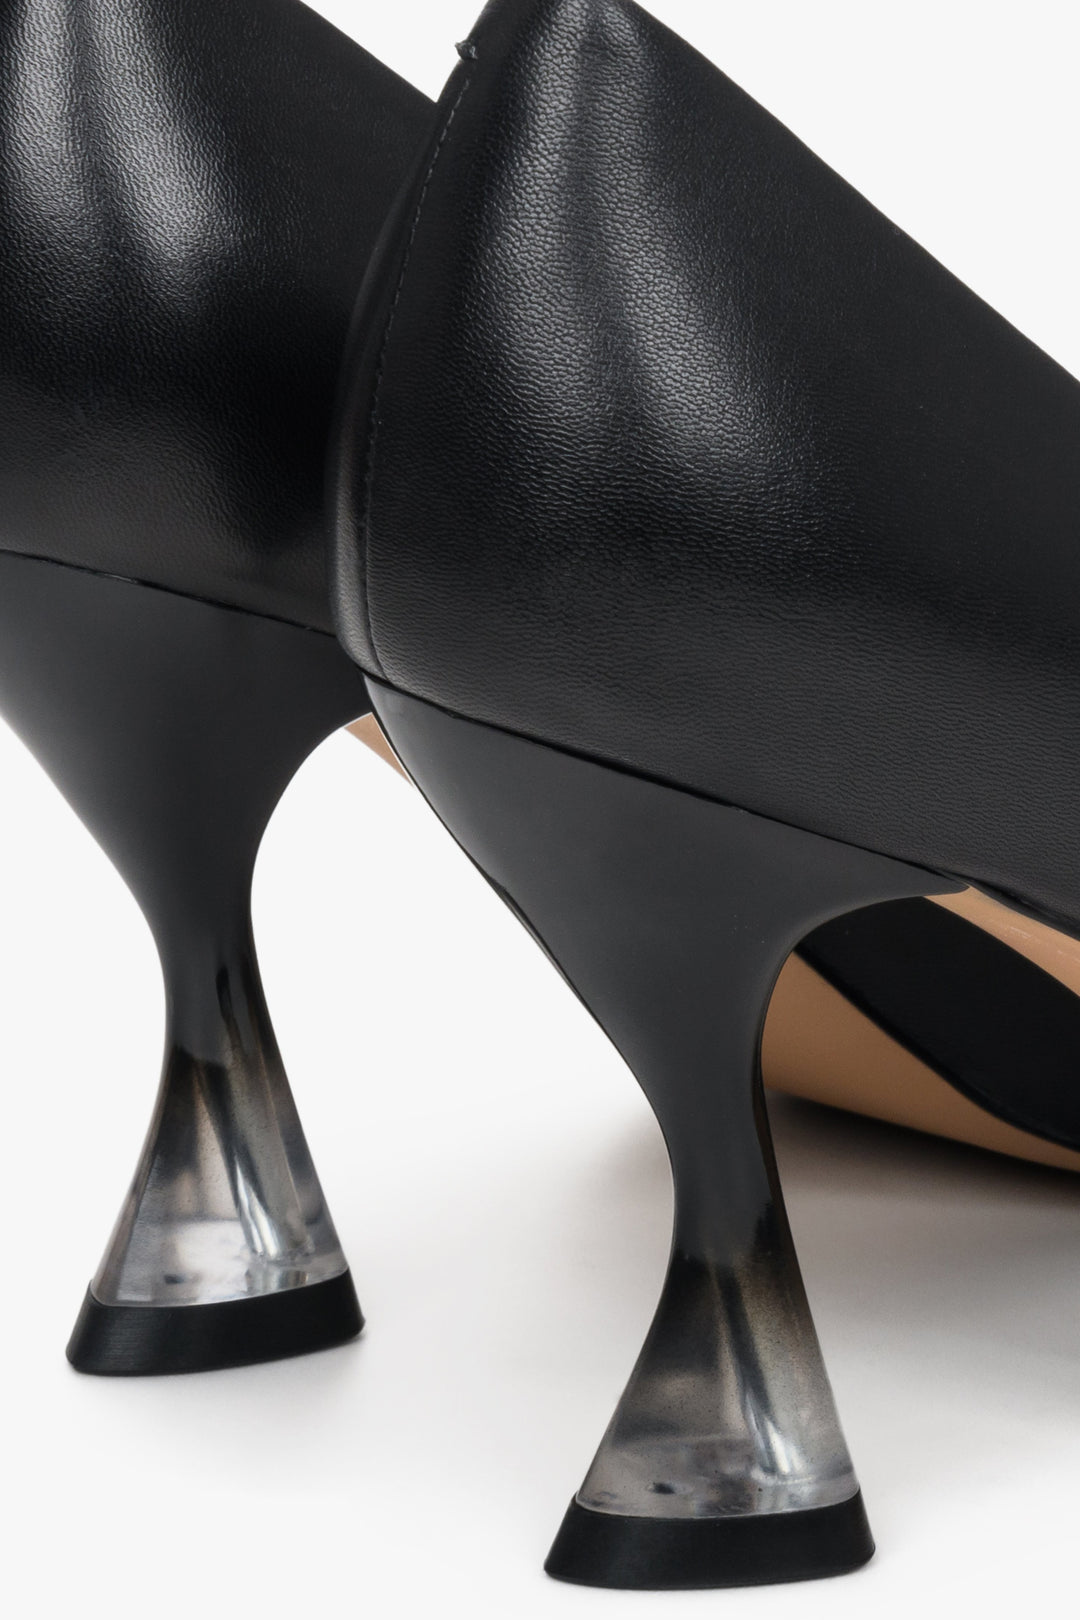 Women's black leather high-heeled pumps by Estro - close-up on the heel.